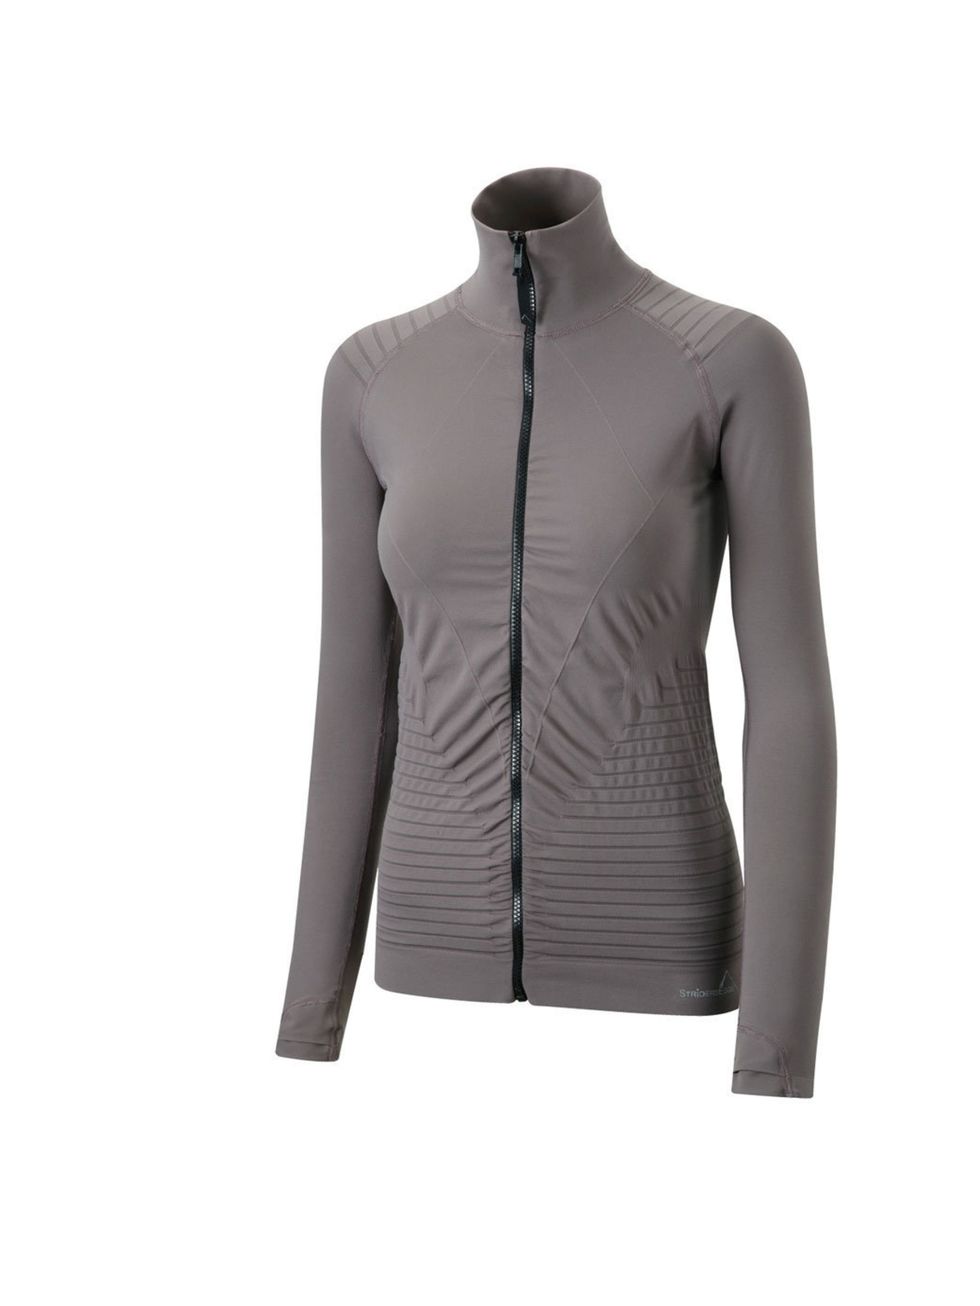 <p>ELLE is quite taken with performance apparel brand Striders Edge. This lightweight breathable jacket feels great, is antibacterial, sweat wicking and breathable. The unusual mushroom hue stands out from the sea of black and grey jackets on the market a